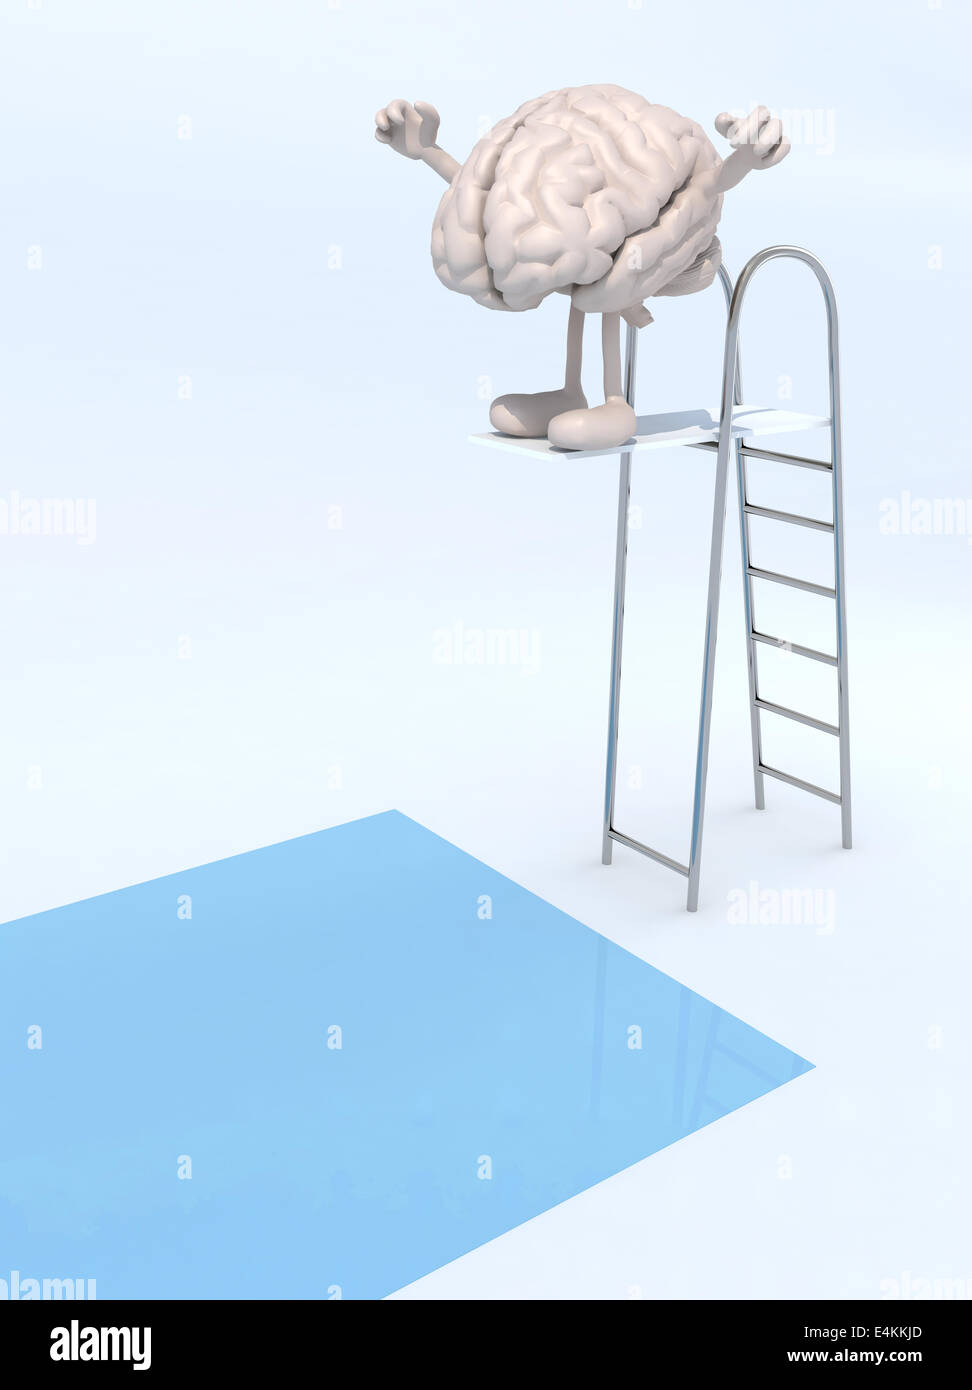 human brain with arms and legs on trampoline dip in the pool, 3d illustration Stock Photo